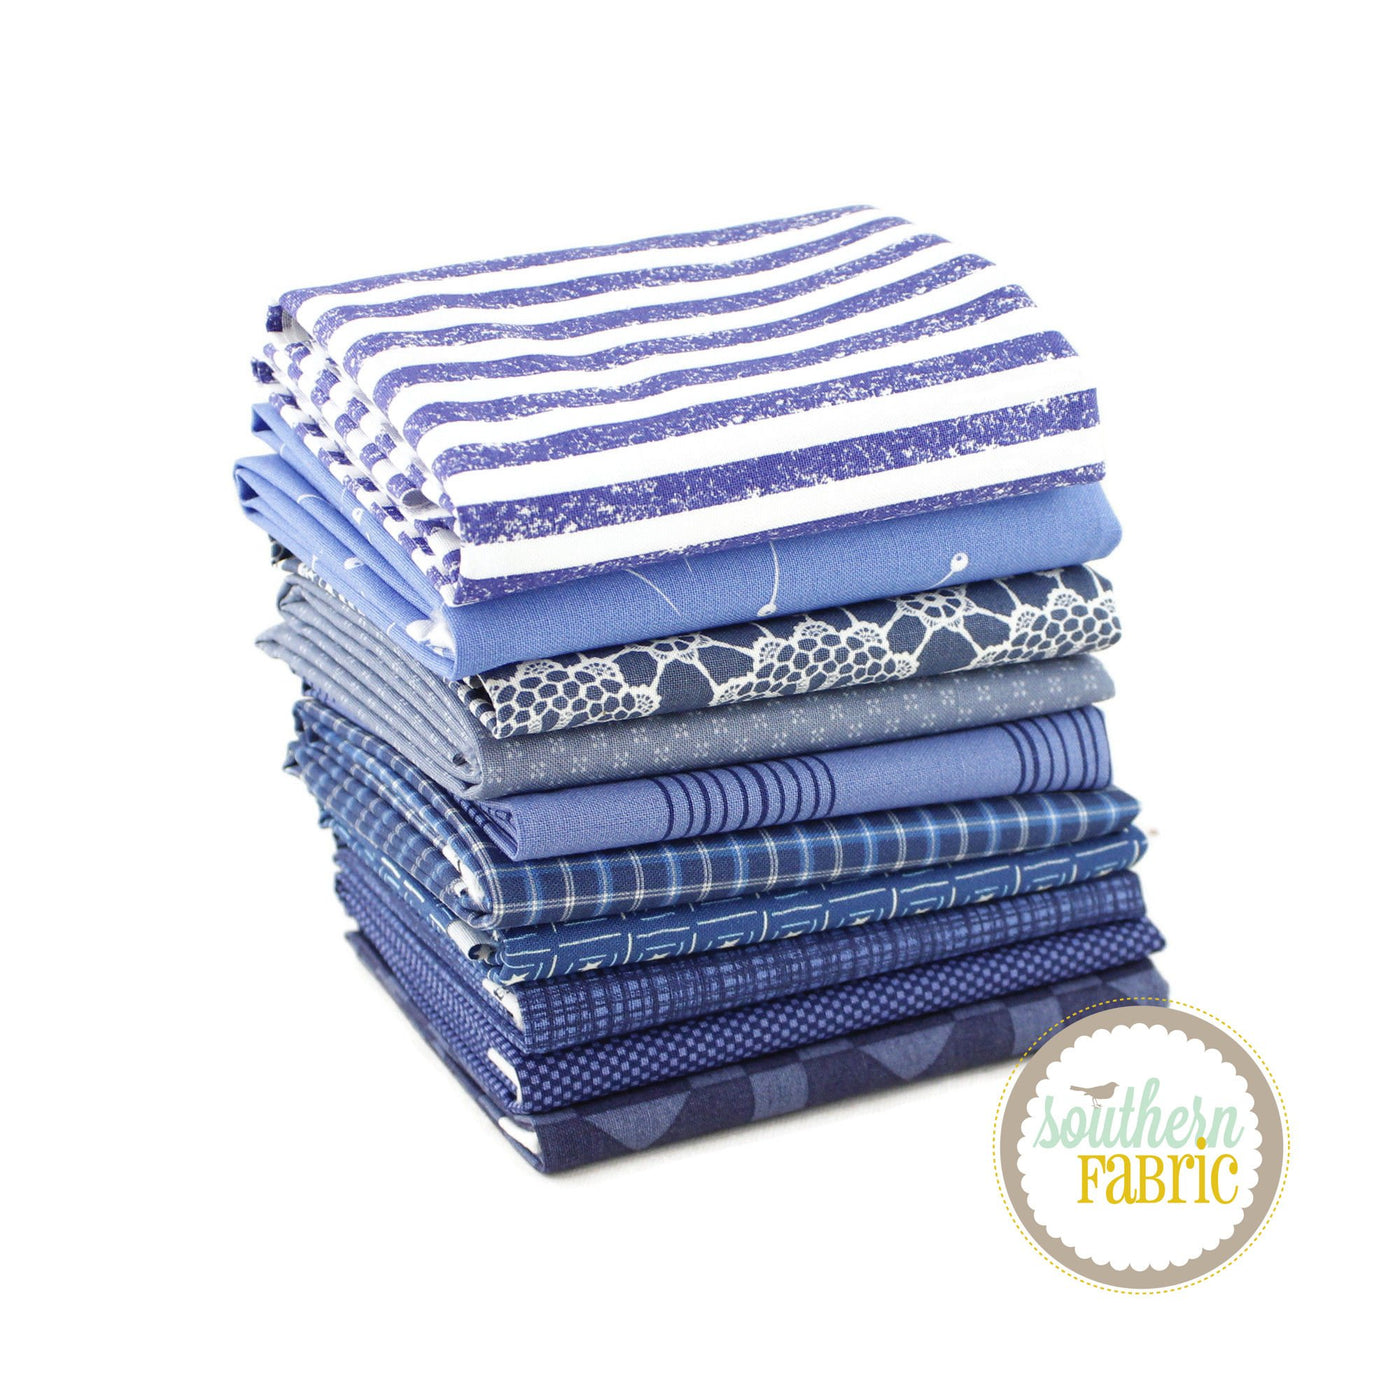 Dark Blue Half Yard Bundle (10 pcs) by Mixed Designers for Southern Fabric